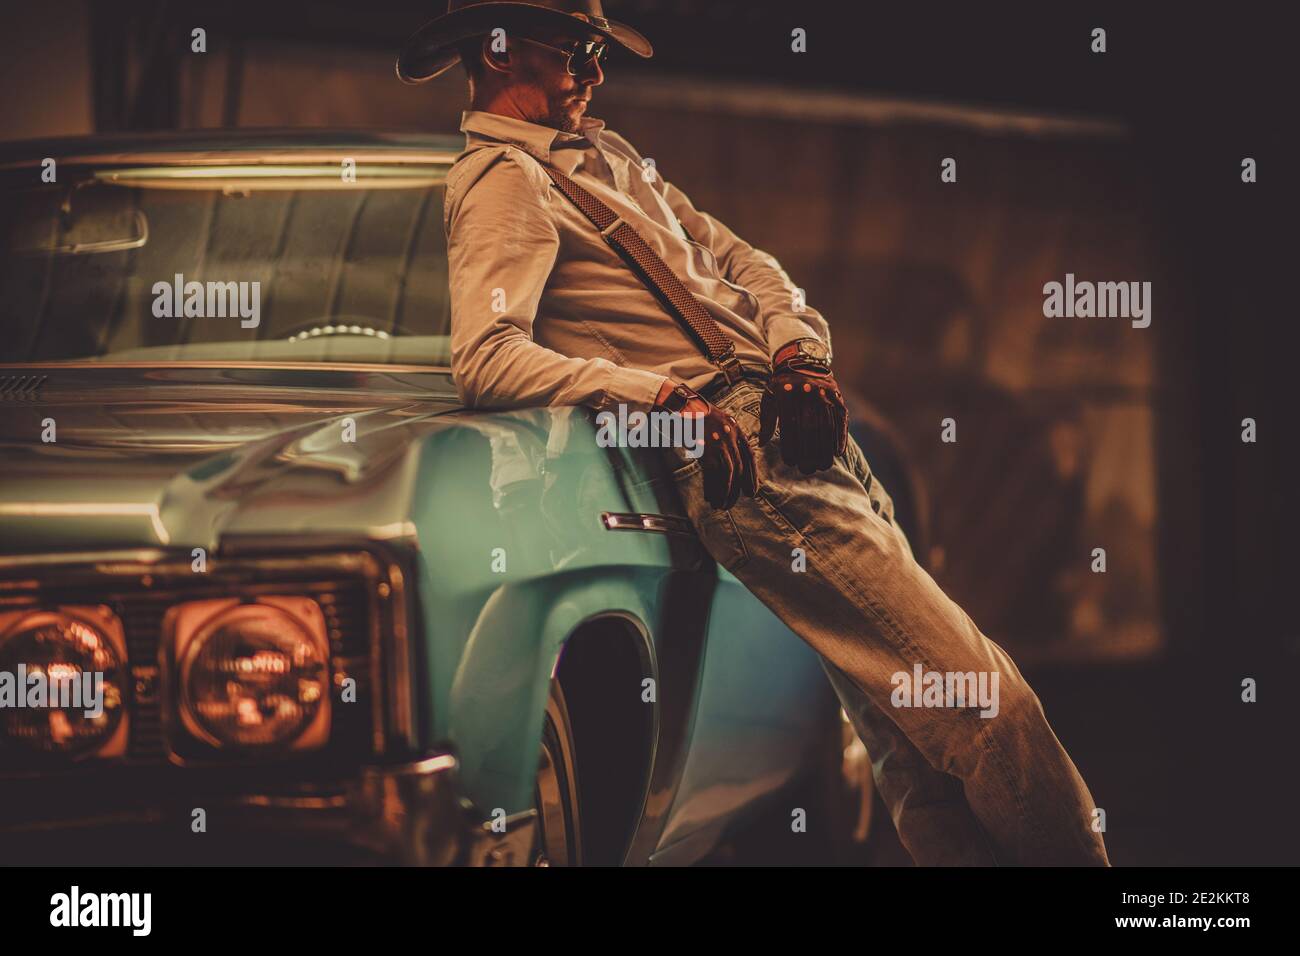 Thirty Seven Years Old Cowboy Wearing Leather Western Style Hat and Gloves and His Classic Vintage Car. Automotive Theme. Stock Photo